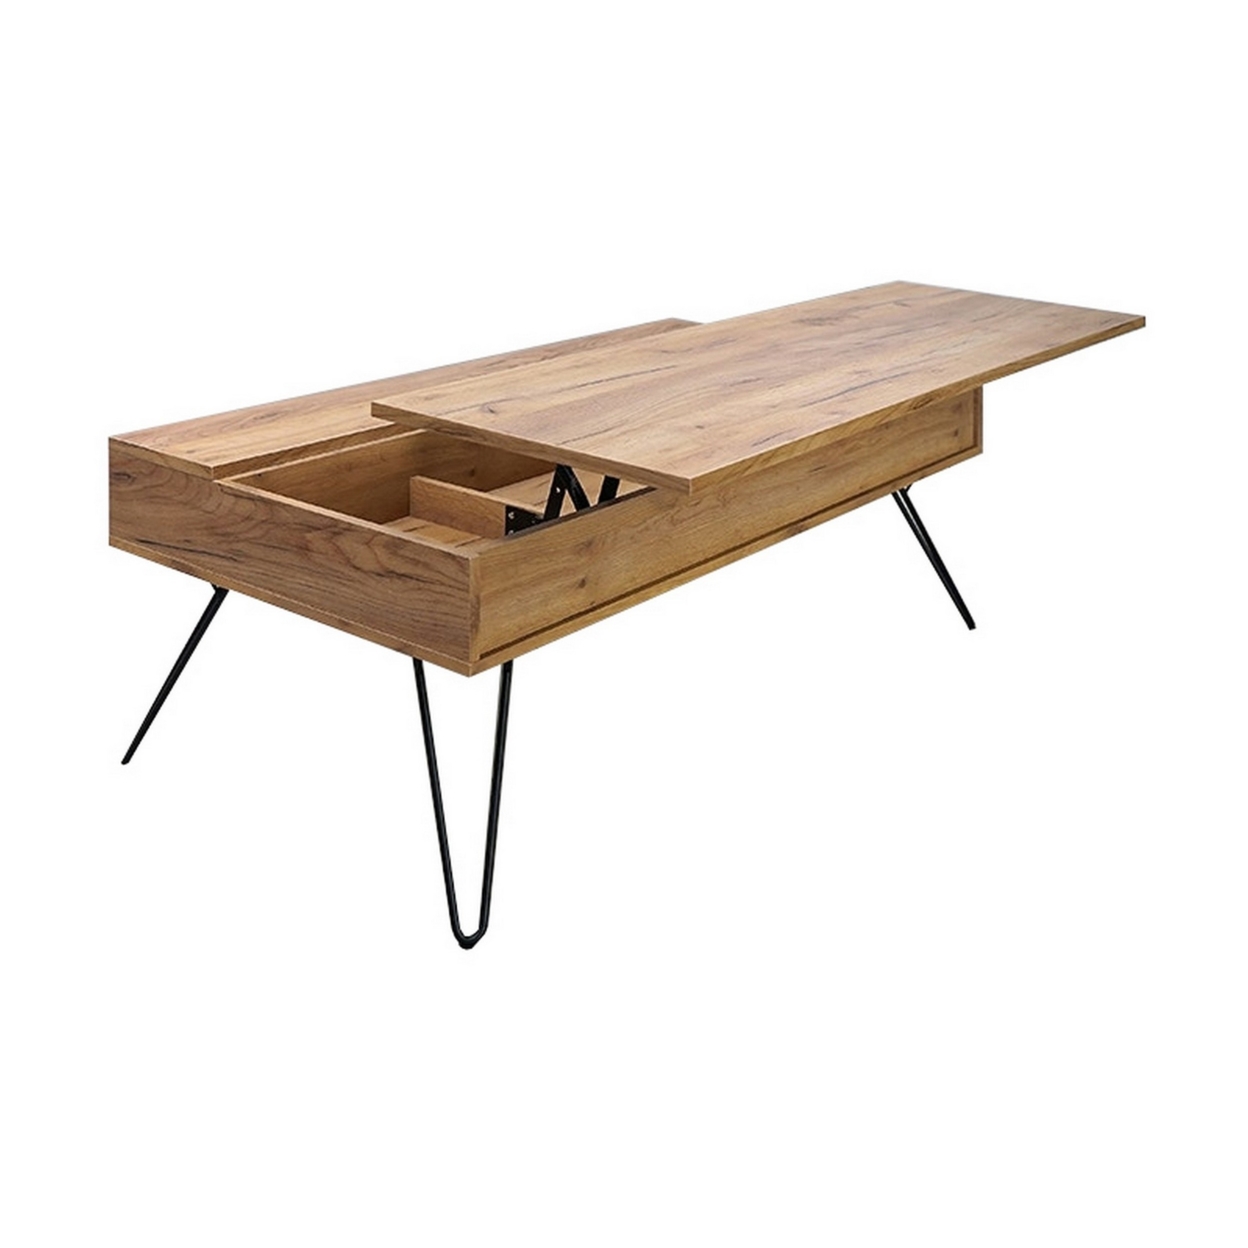 47 Inch Lift Top Coffee Table, Natural Brown Wood, 2 Storage Compartments